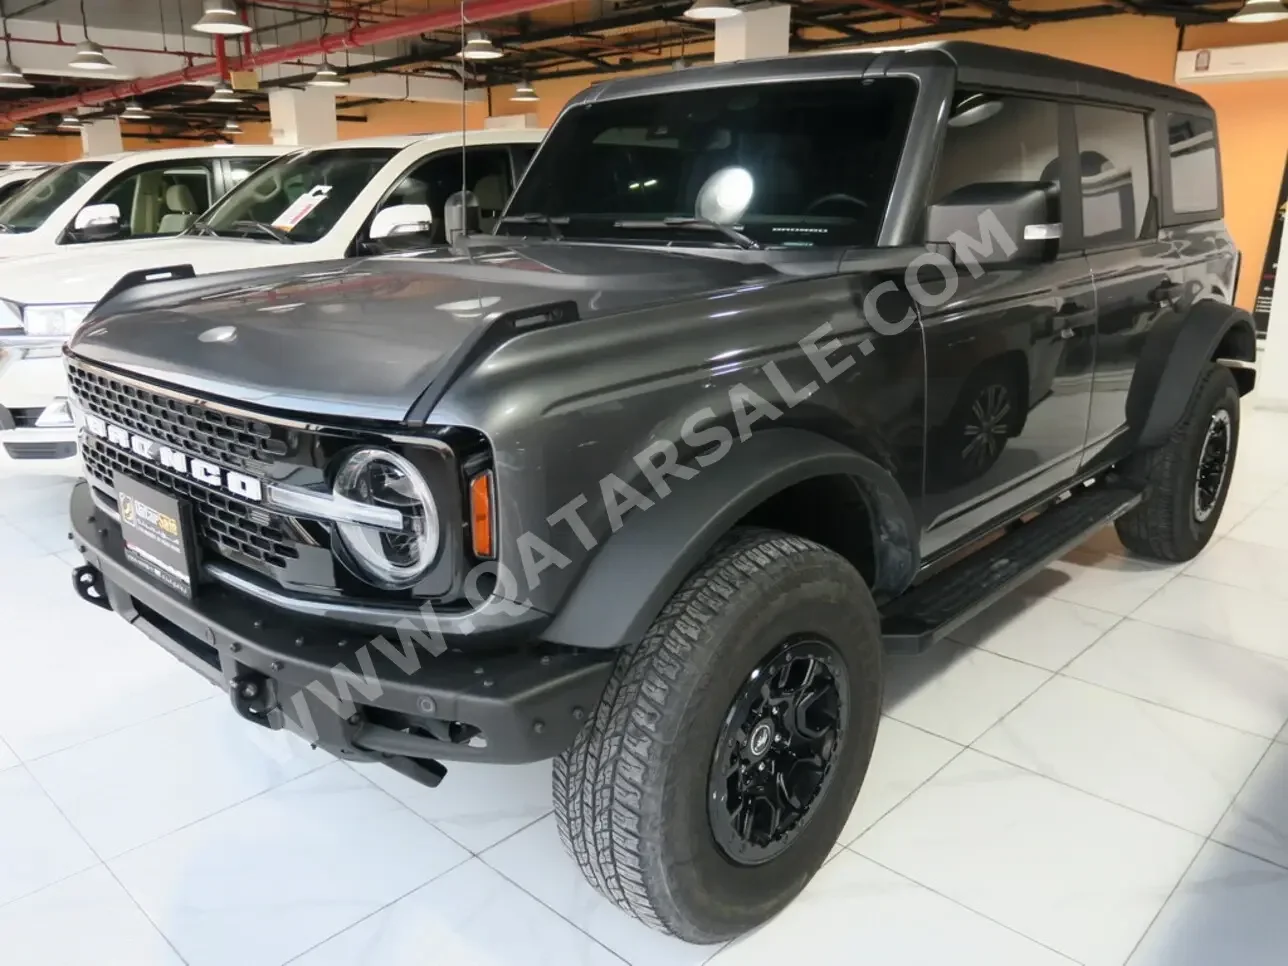 Ford  Bronco  Badlands  2022  Automatic  46,000 Km  6 Cylinder  Four Wheel Drive (4WD)  SUV  Gray  With Warranty